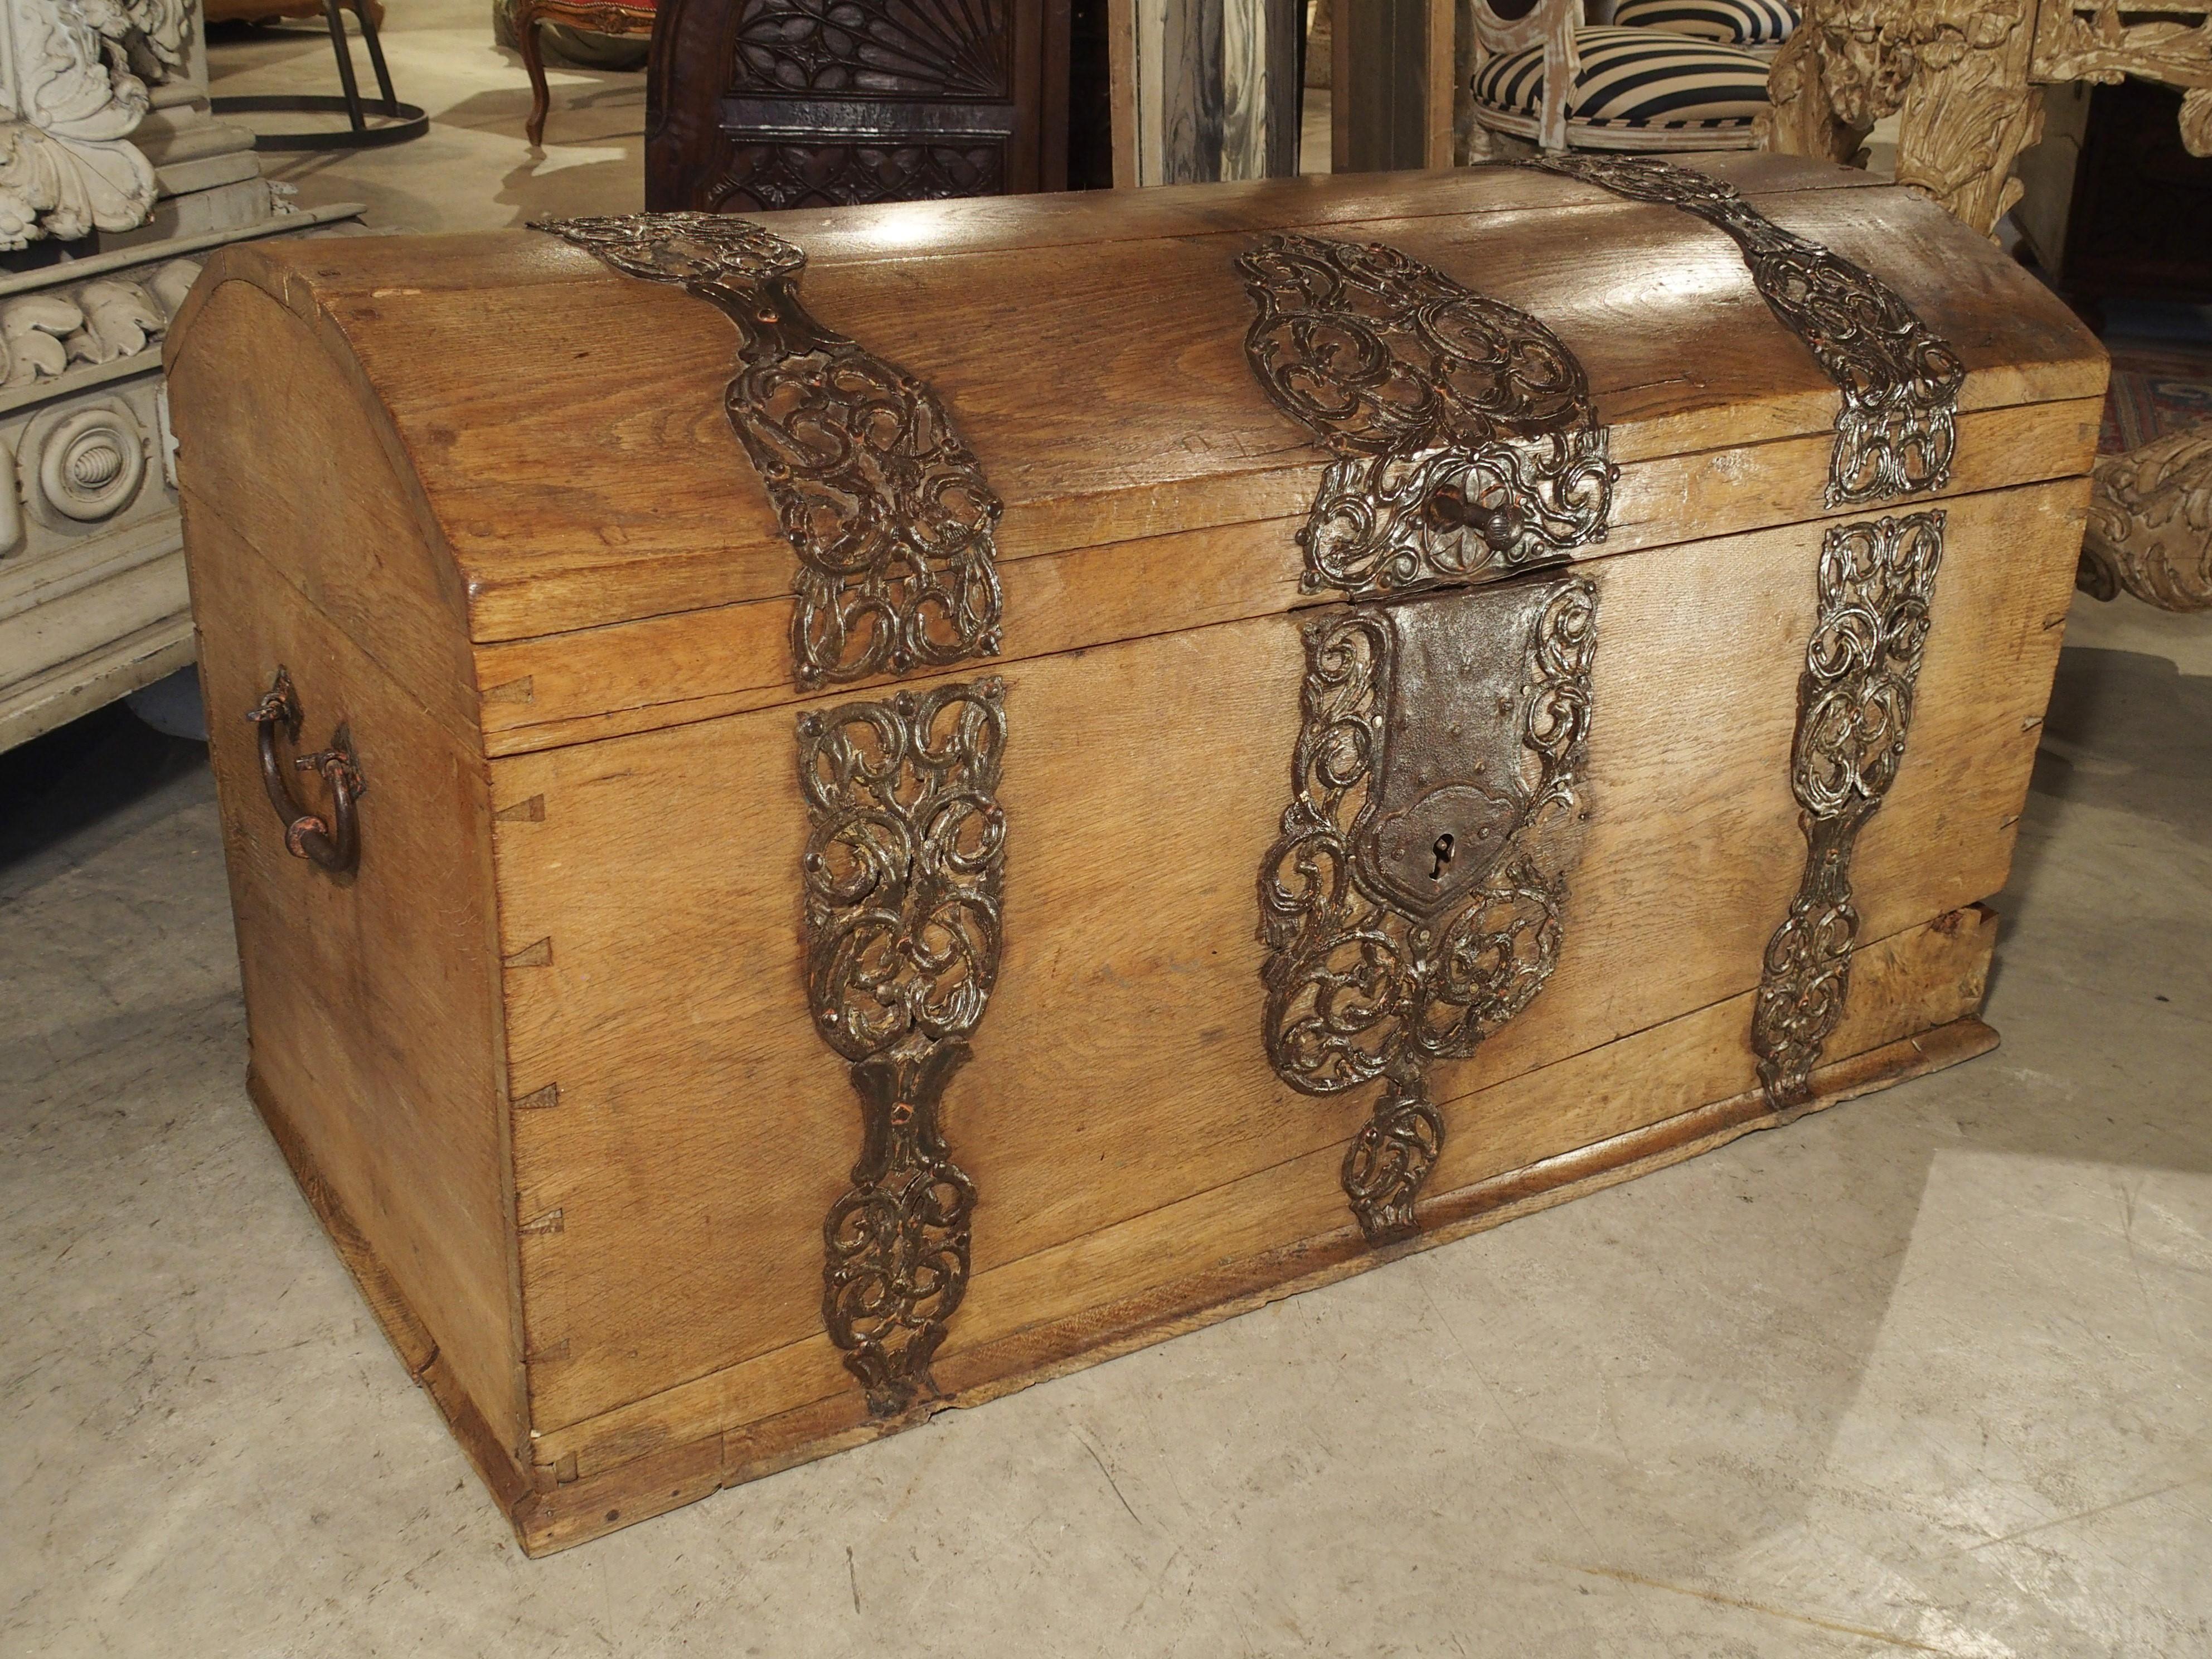 Large Domed Oak German Baroque Trunk with Decorative Iron Strapwork, circa 1700 13